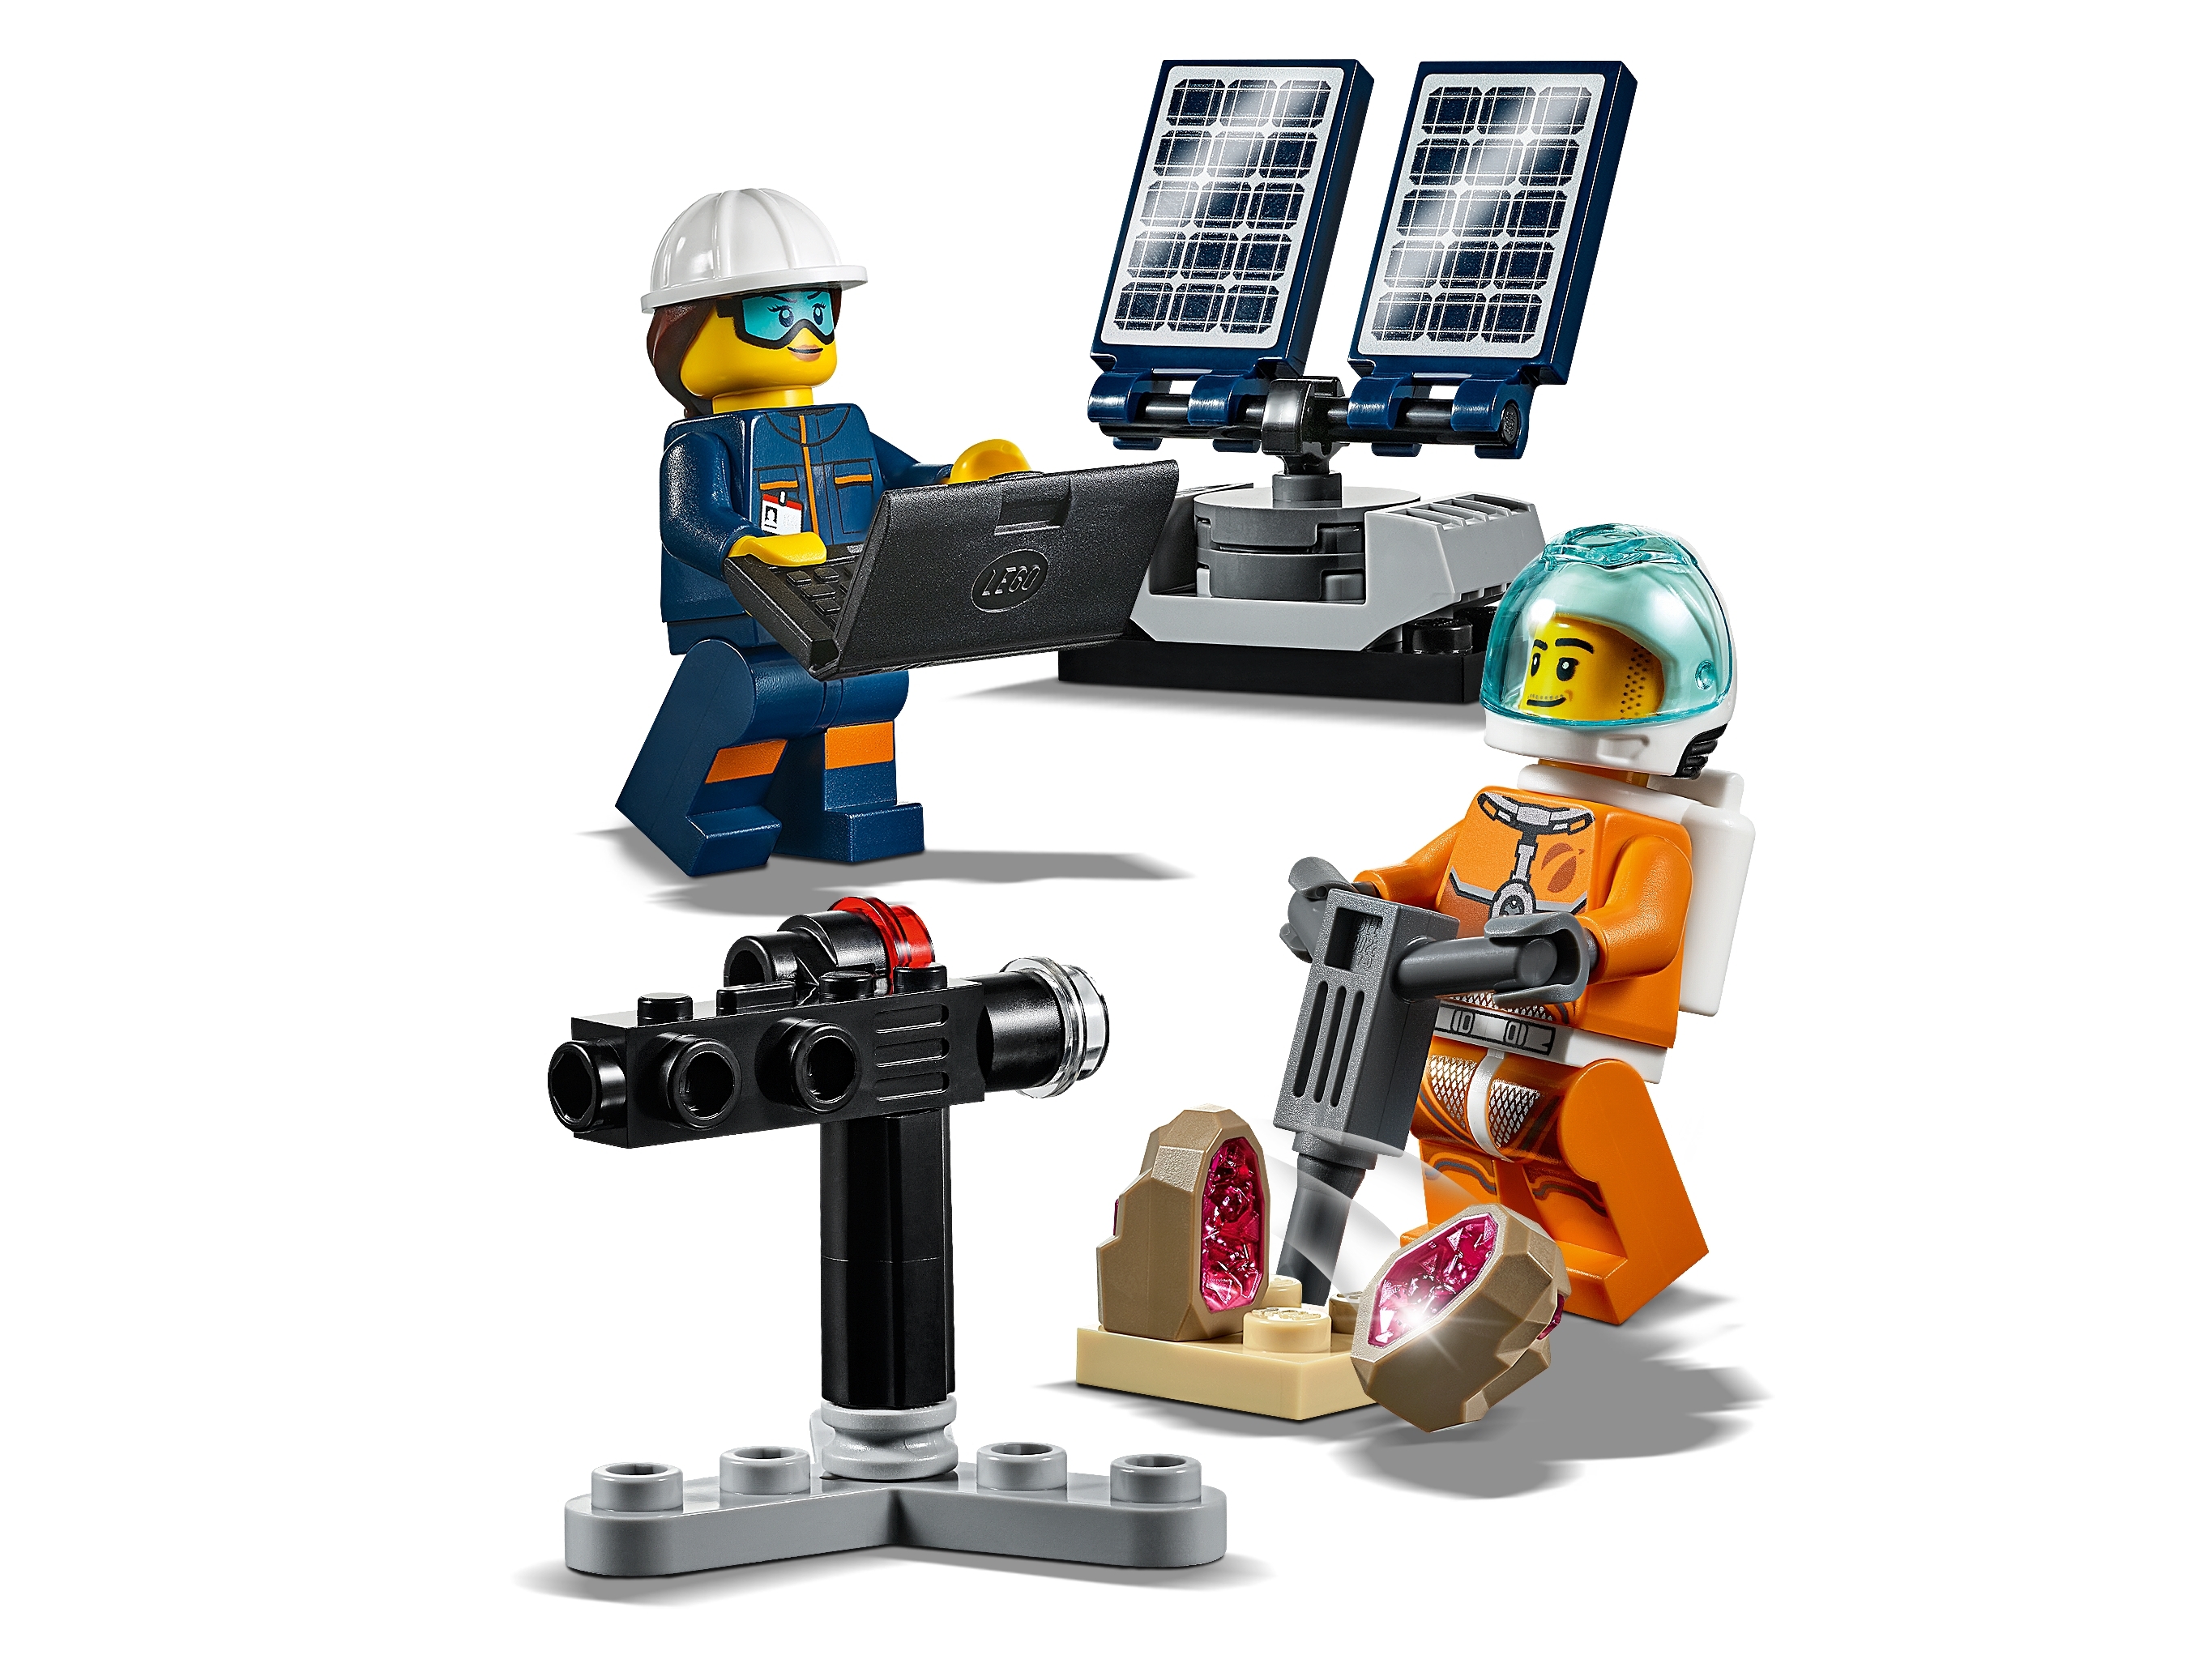 Rover Testing Drive 60225 City | Buy online at the Official LEGO® Shop US